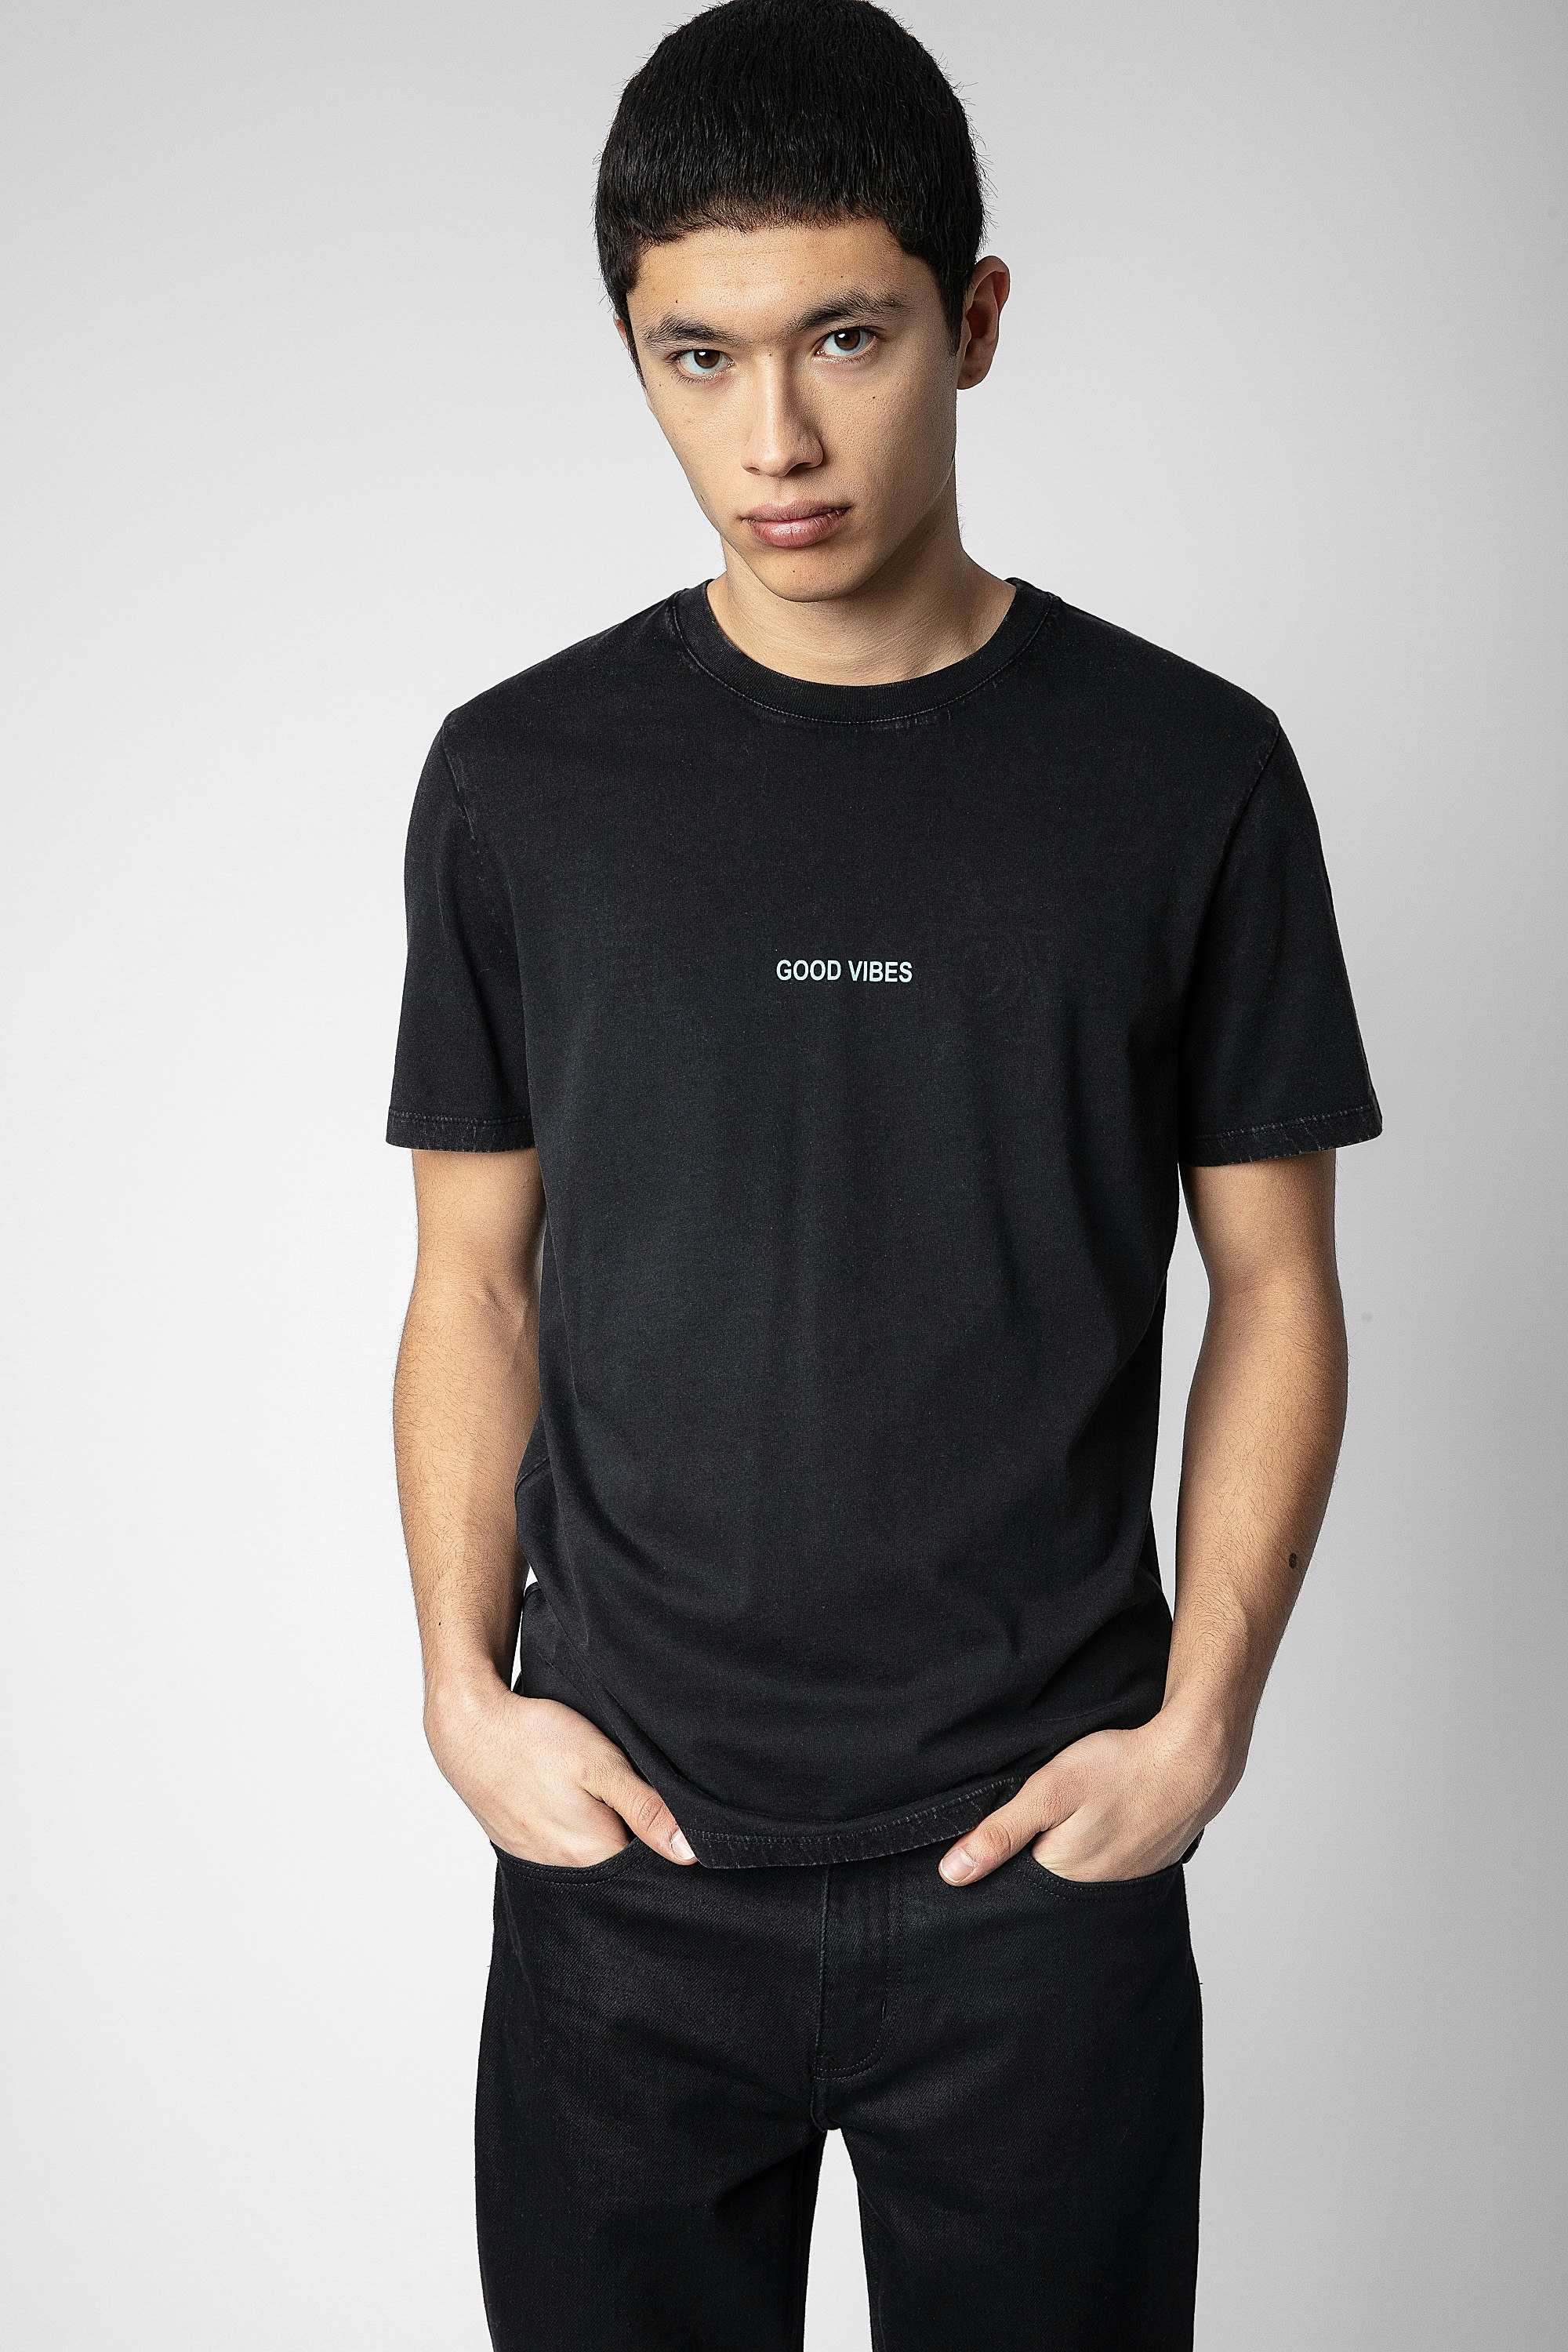 Ted T-shirt - Men's black cotton T-shirt with "Good Vibes" printed on the front and wings and Zadig Happy face on the back